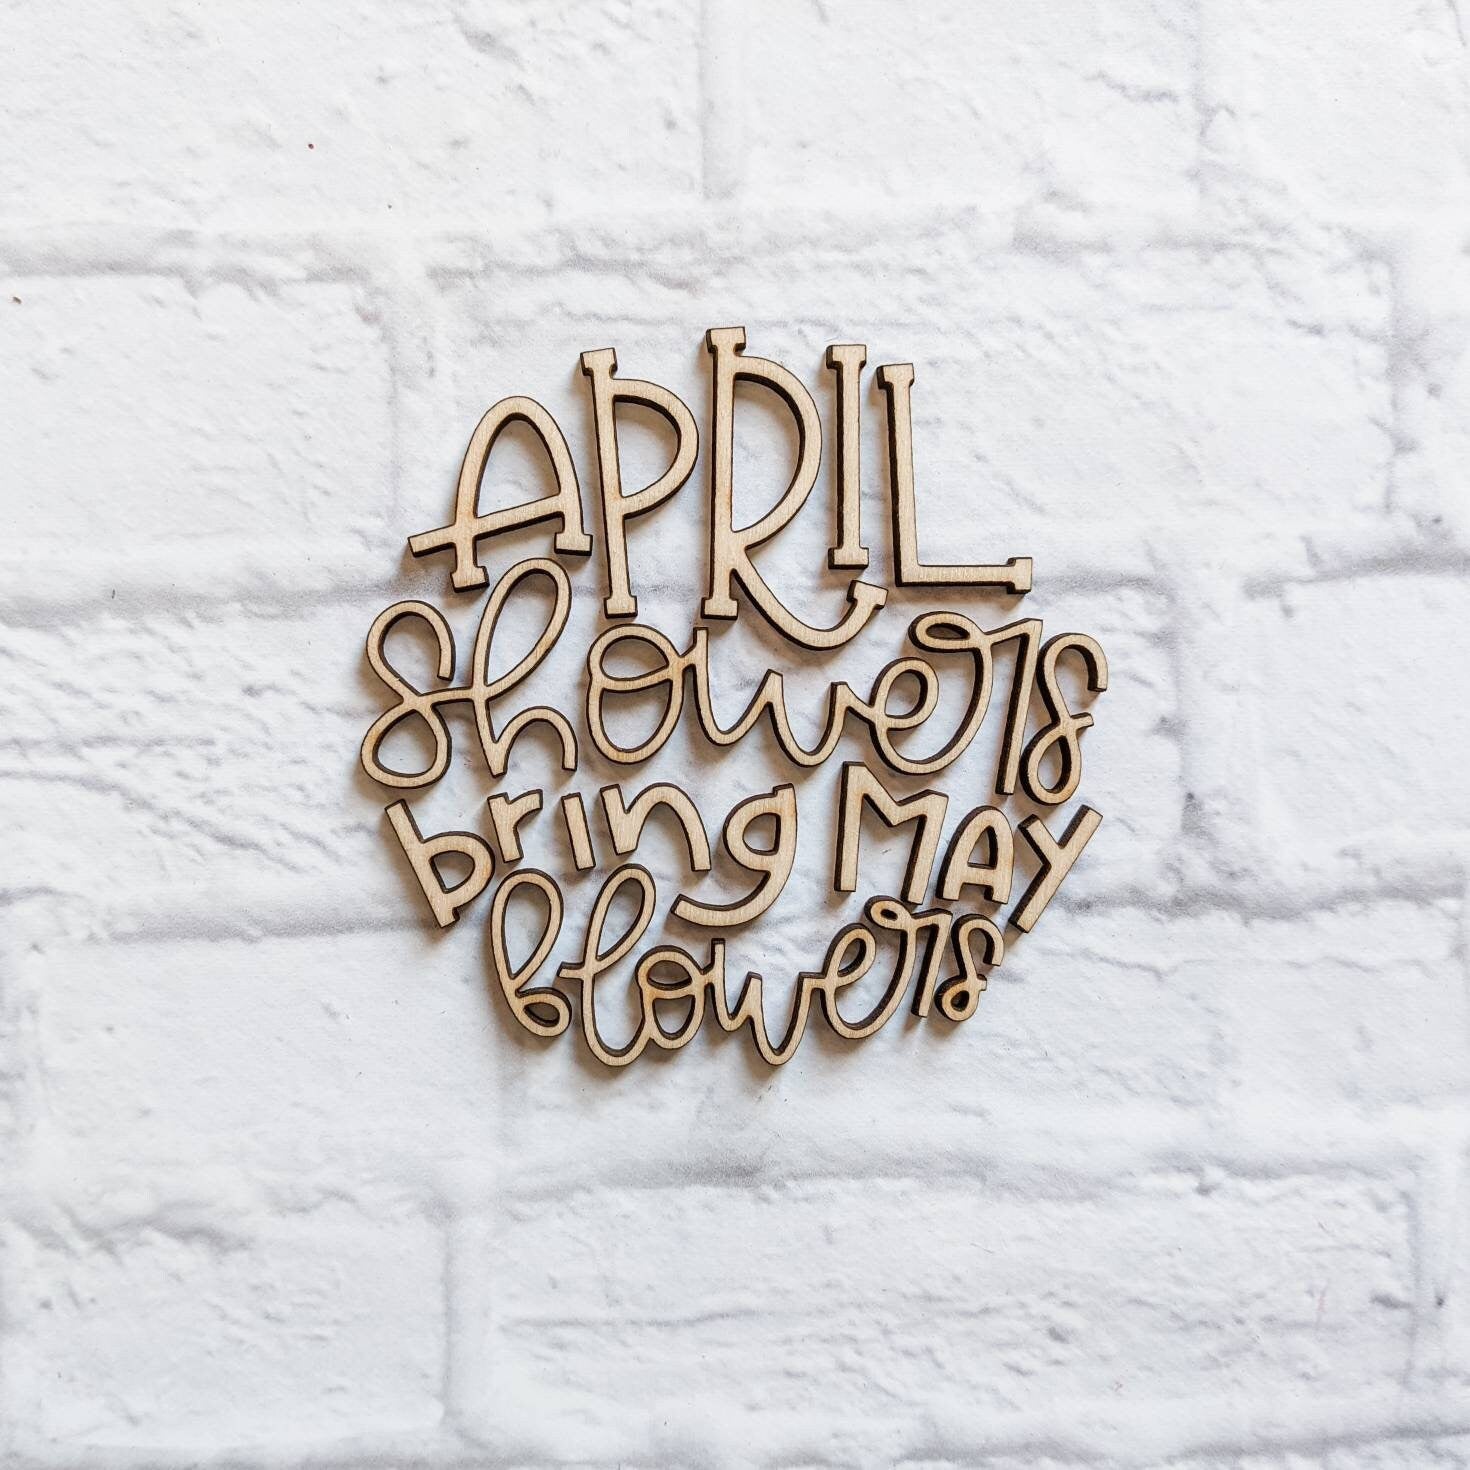 APRIL SHOWERS bring may flowers set - Various Sizes - Wooden Blanks- Wooden Shapes - laser cut shape - Seasonal Rounds